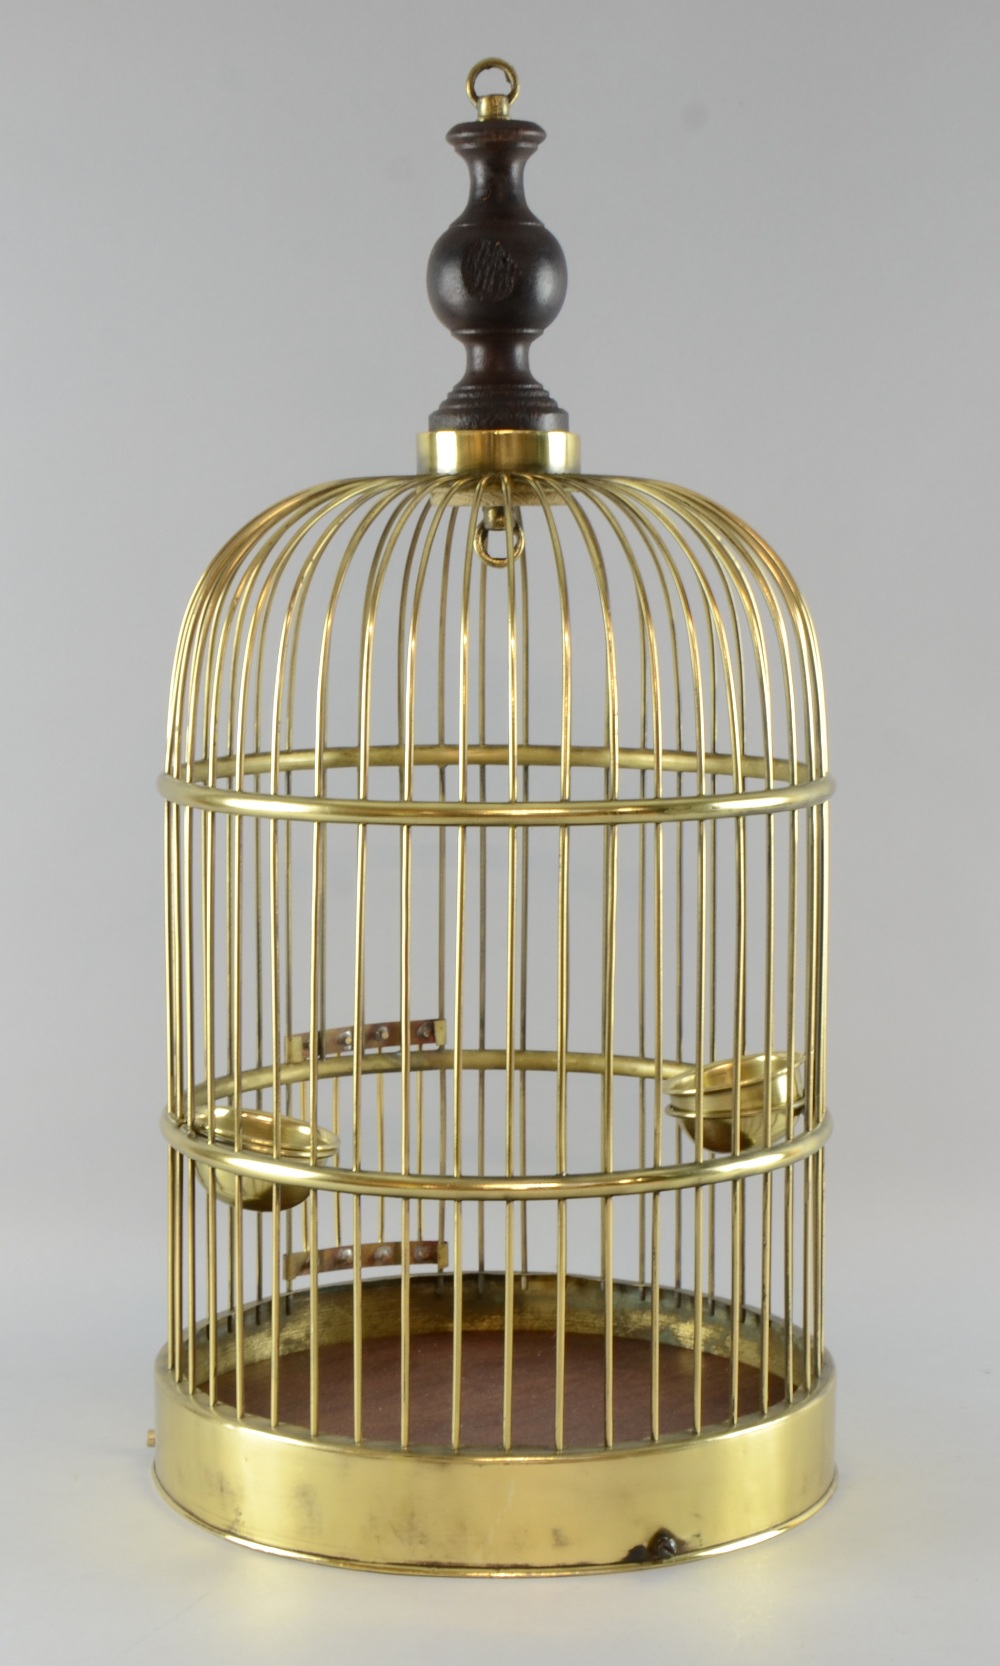 Brass parrot cage with two brass wells, wood base 23in. (58cm)